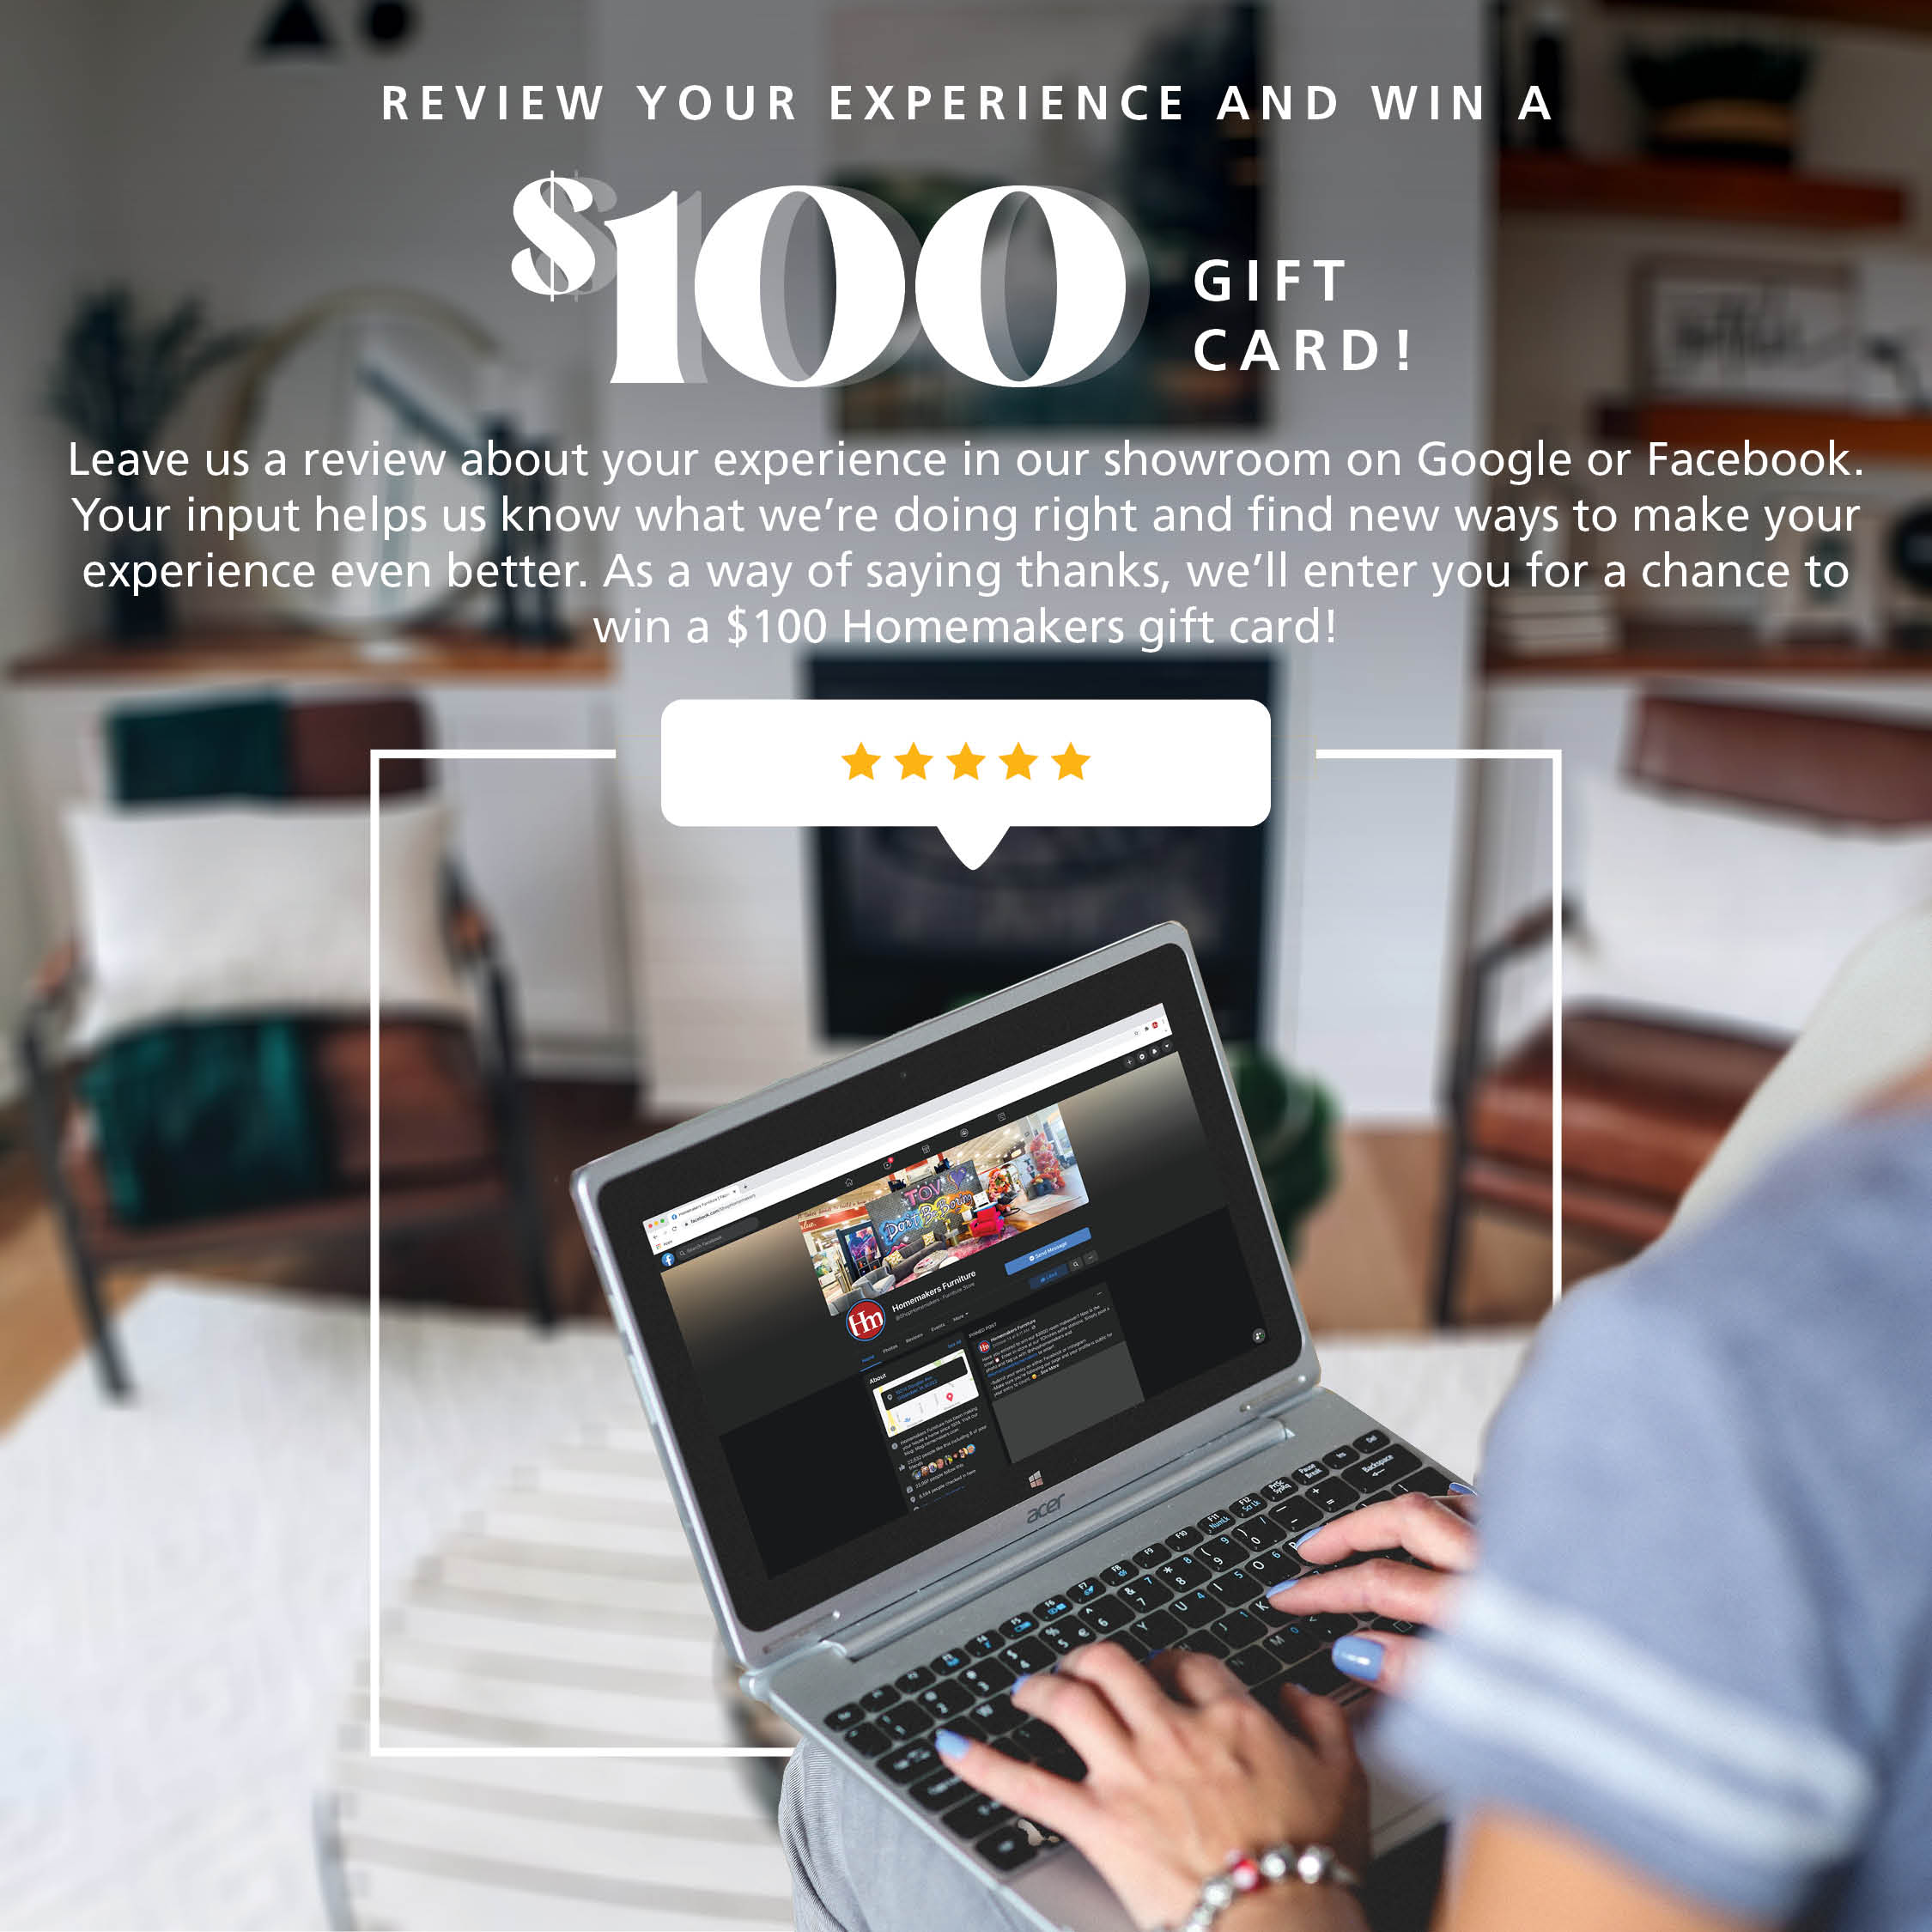 review your experience and win a $100 gift card